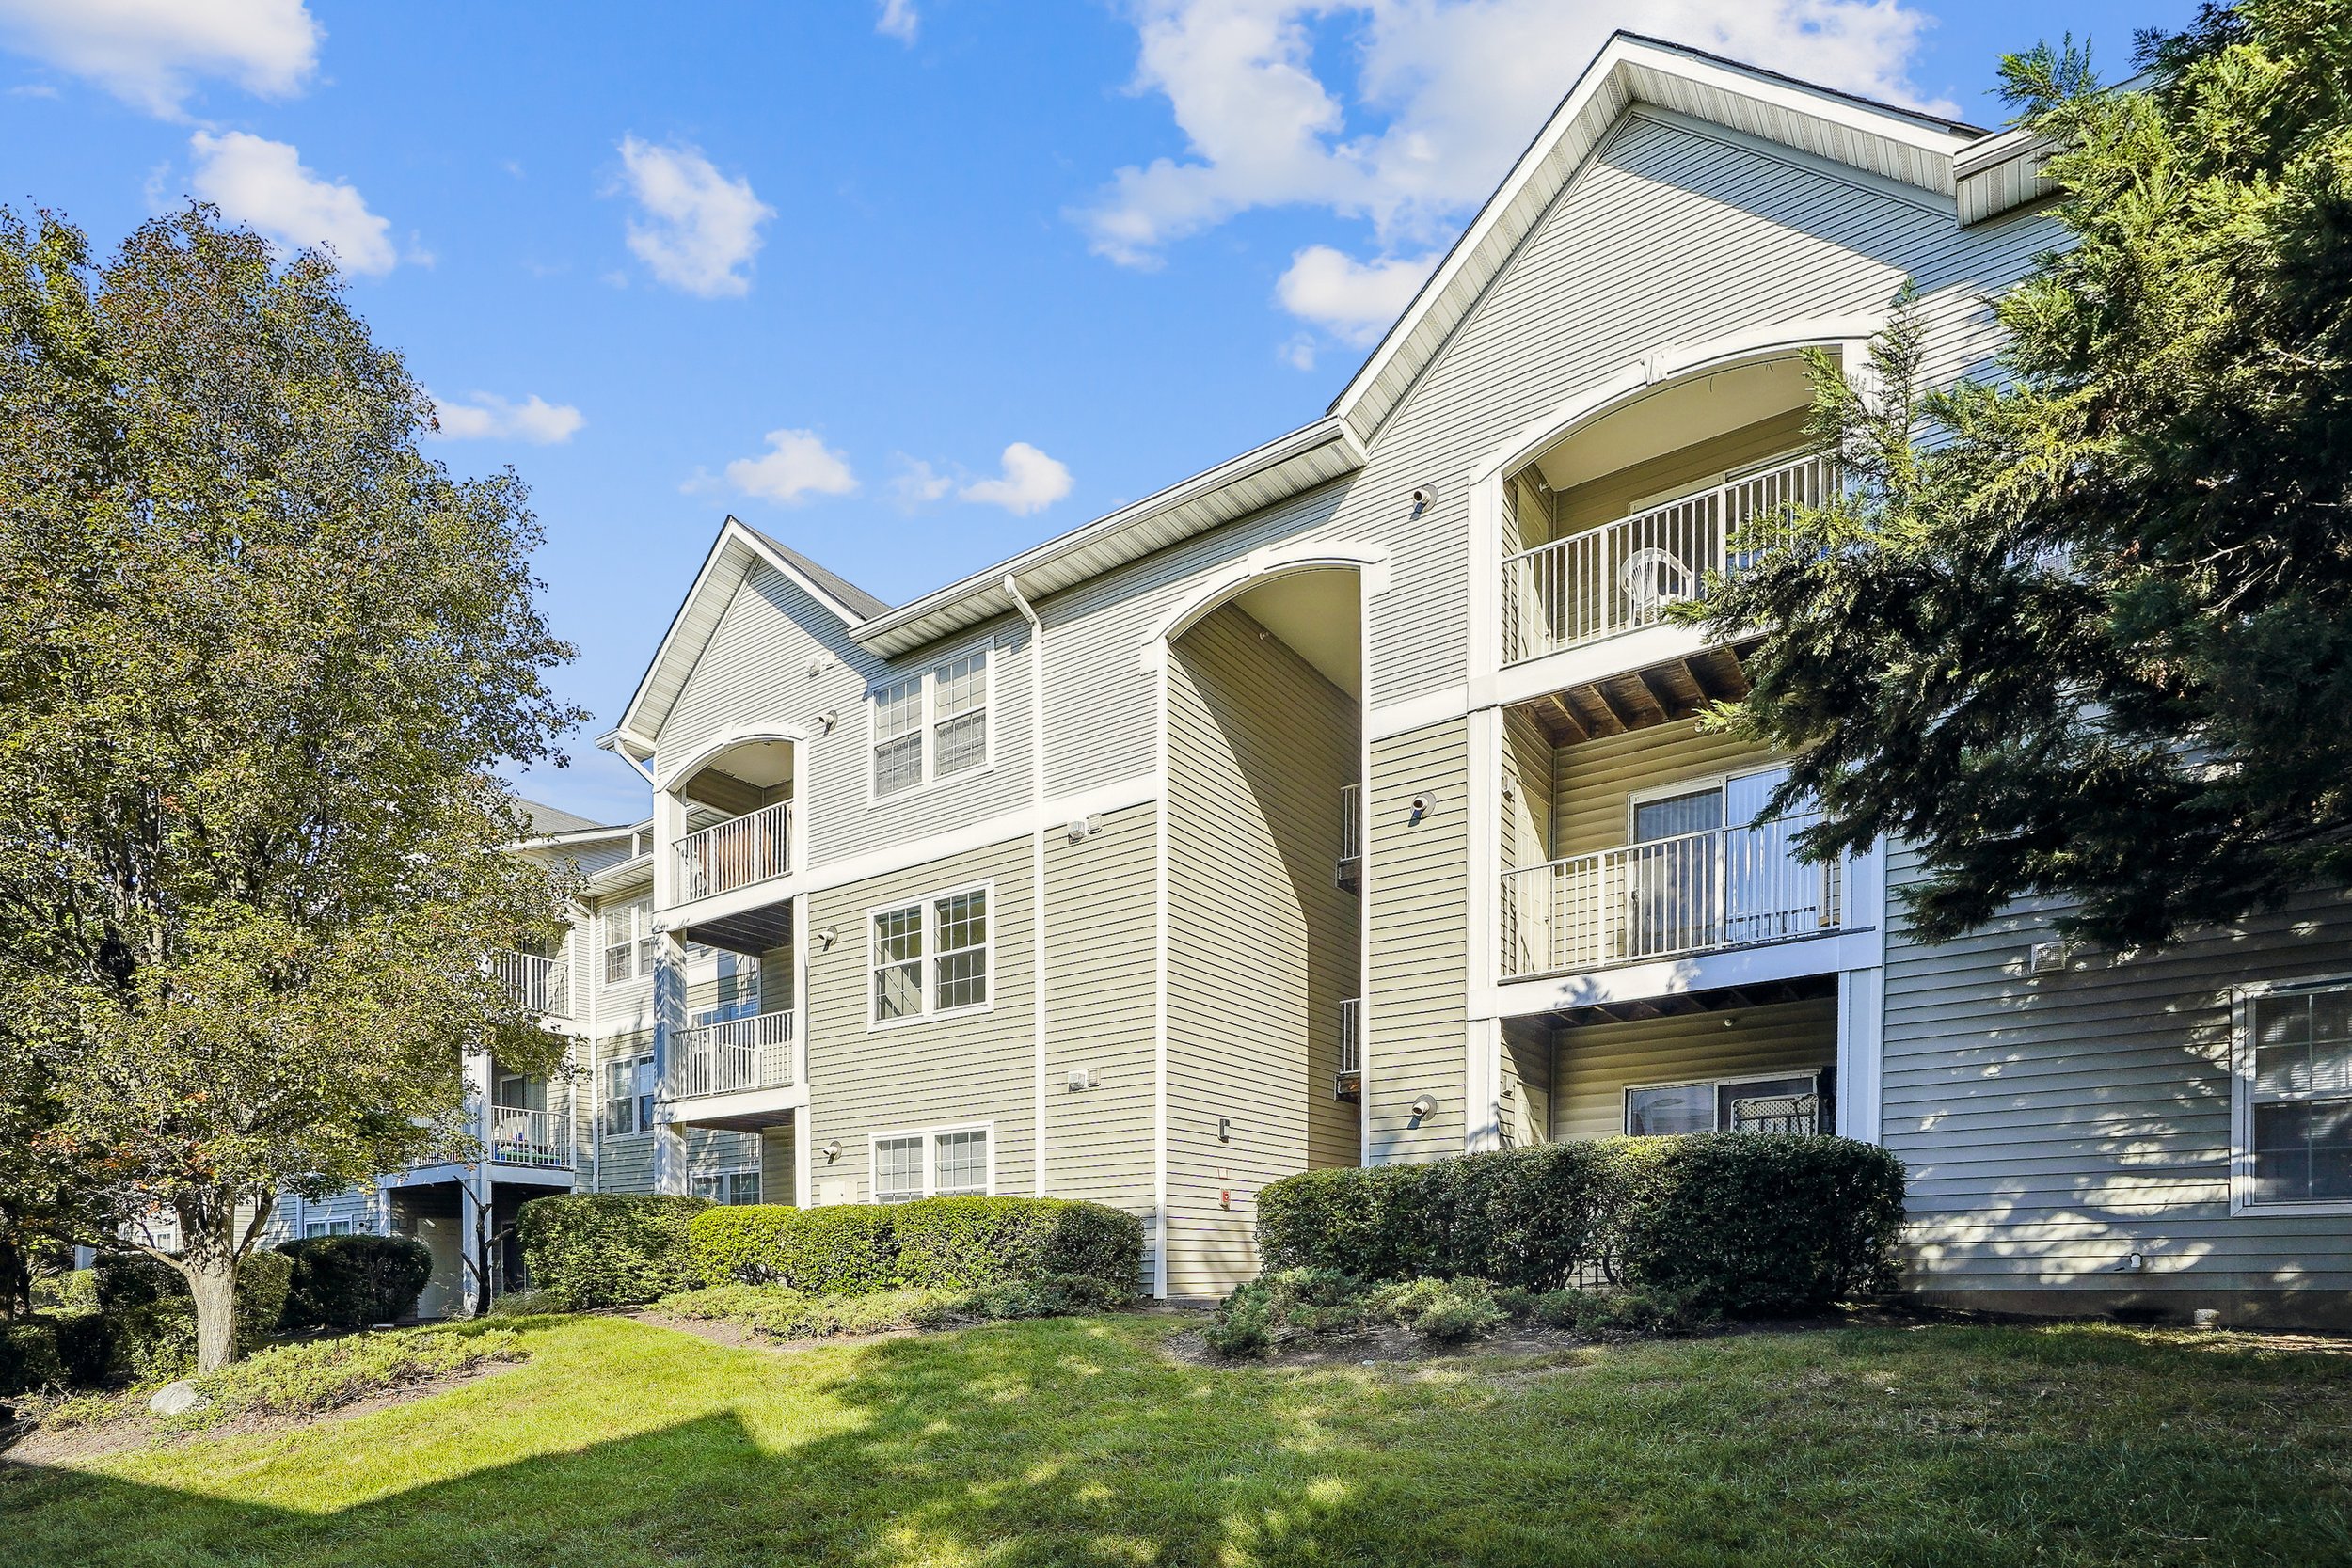  Find your home at Coppermine Run apartments in Herndon, Virginia. 